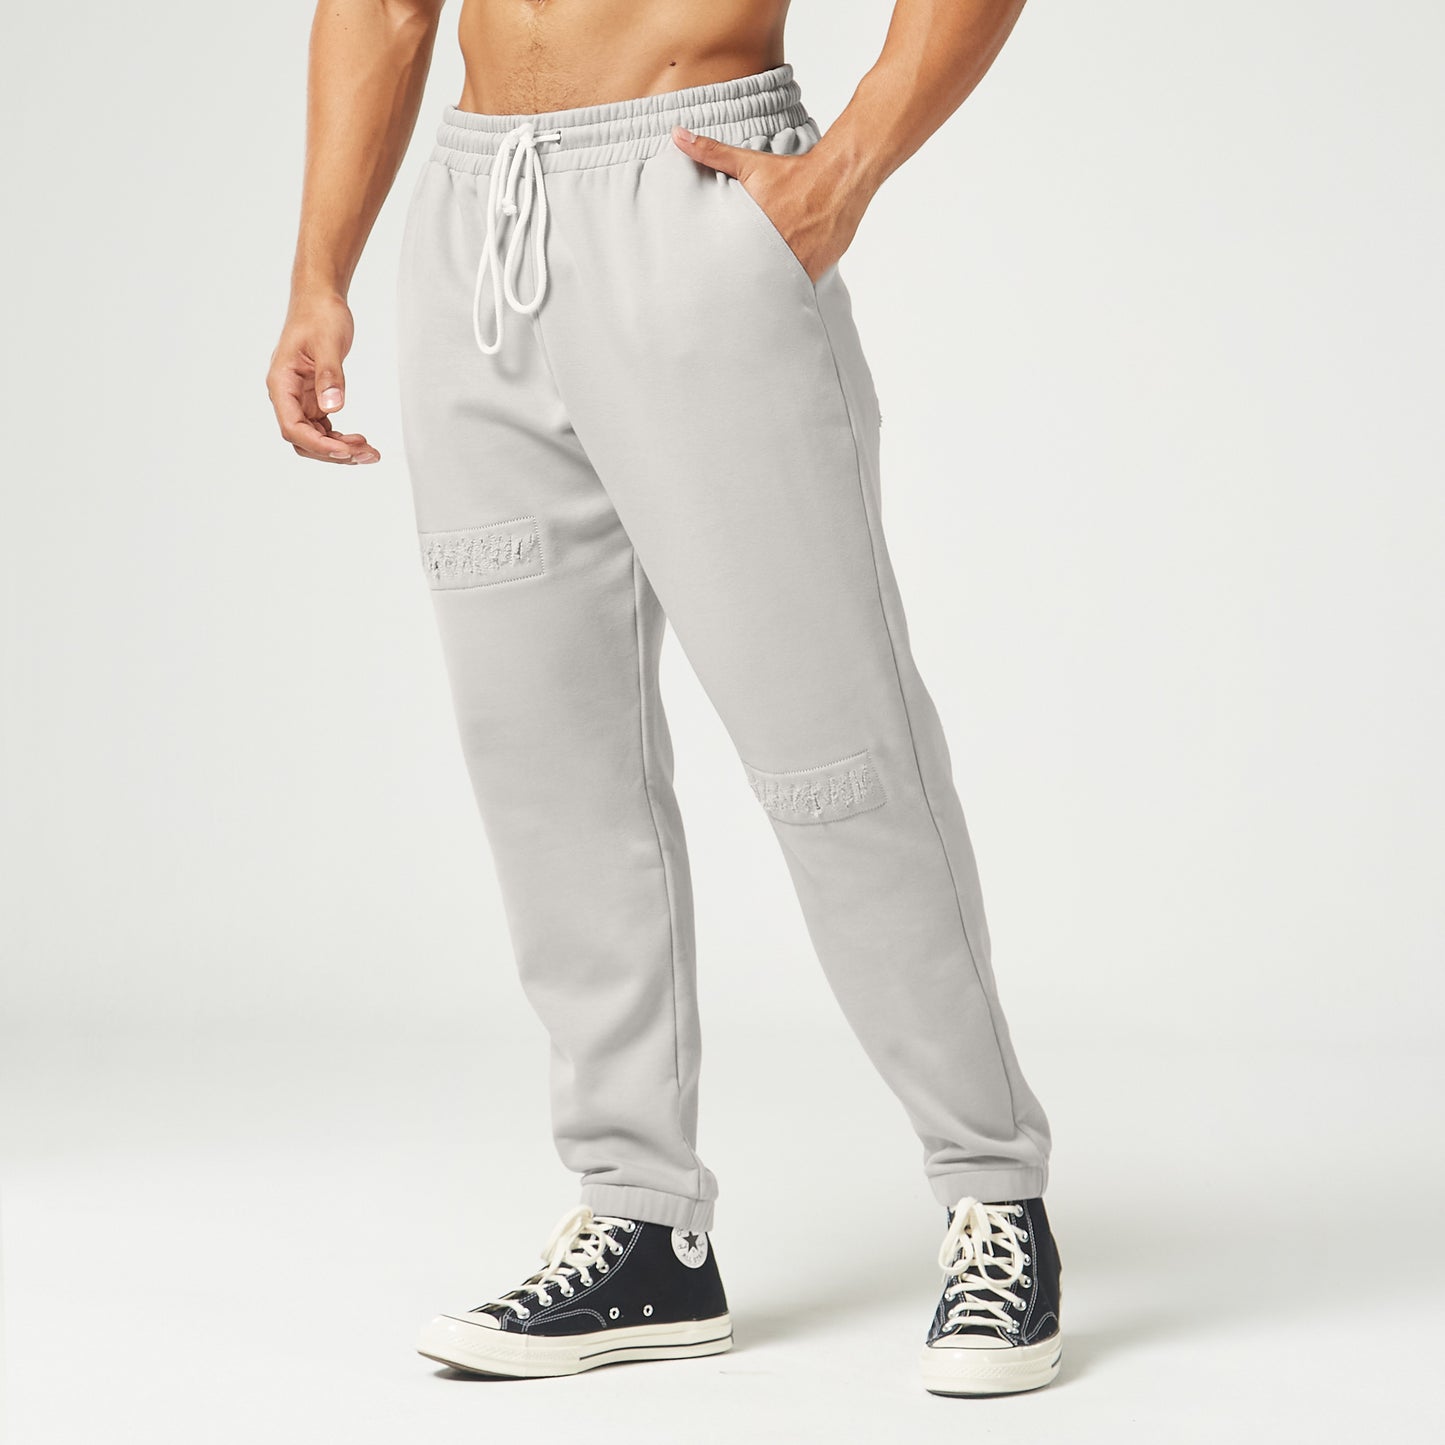 AE | Golden Era Ripped and Repaired Joggers - Light Gray | SQUATWOLF